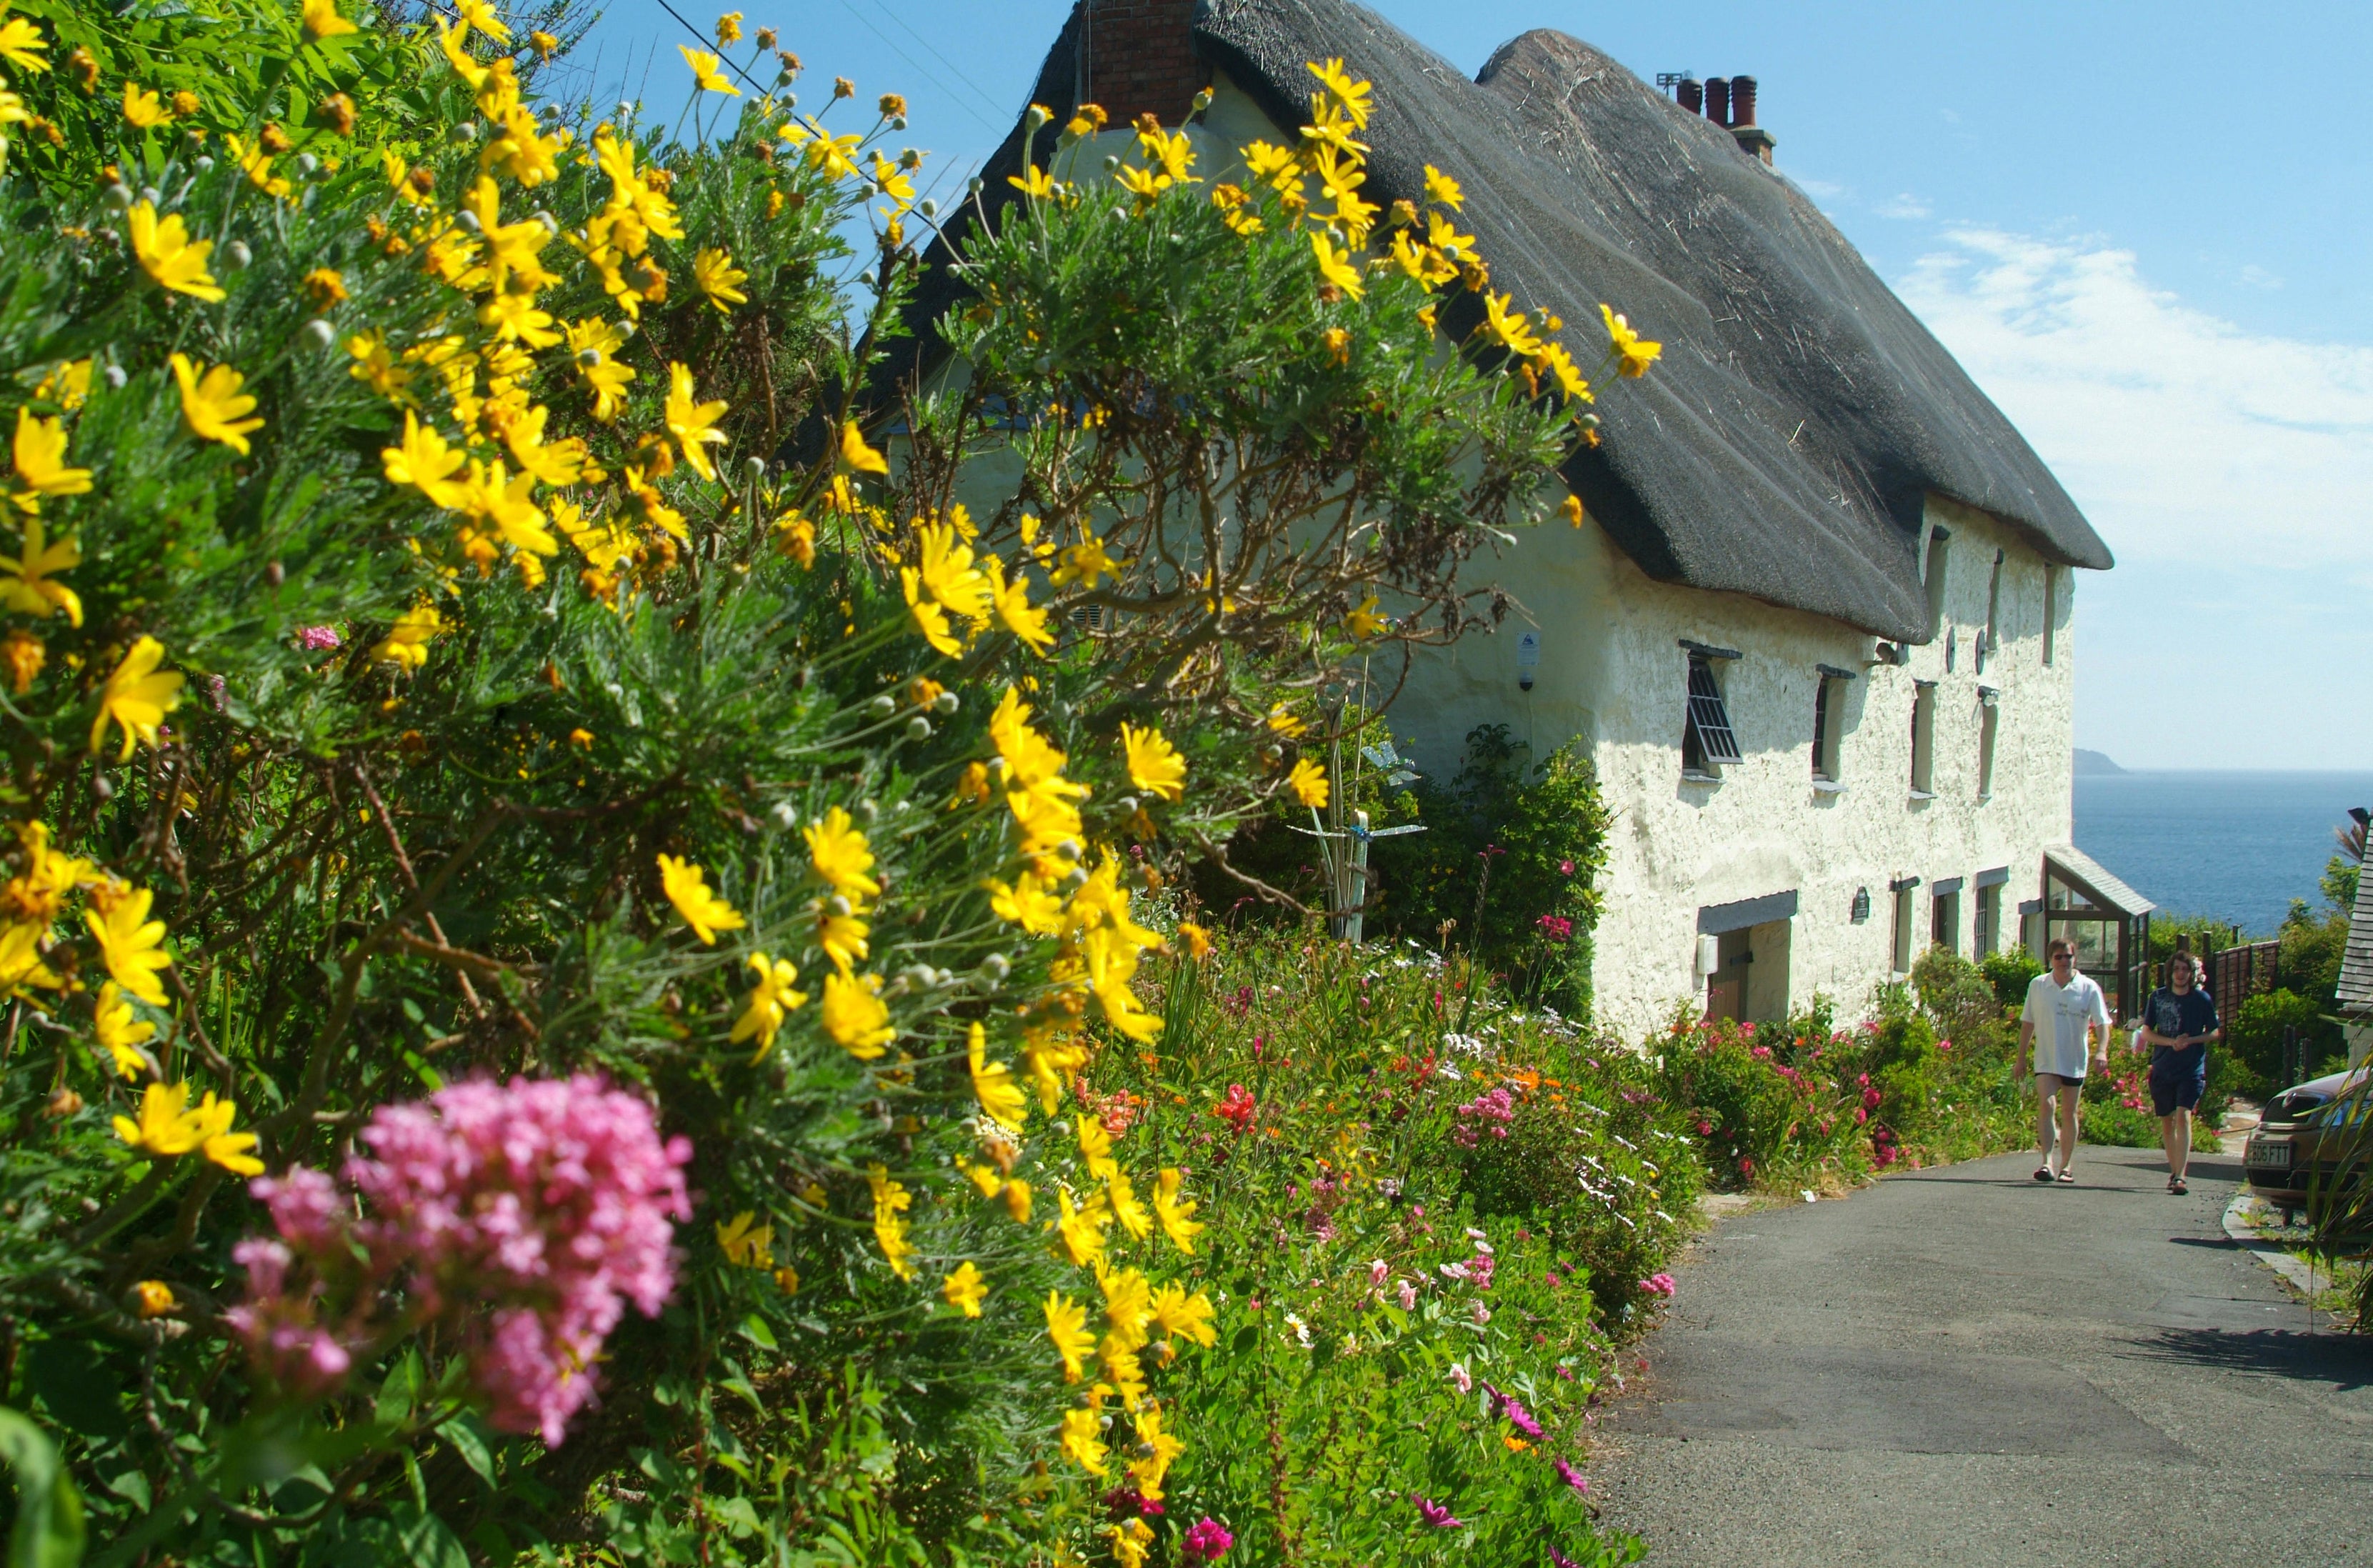 Flowers growing by a seaside cottage